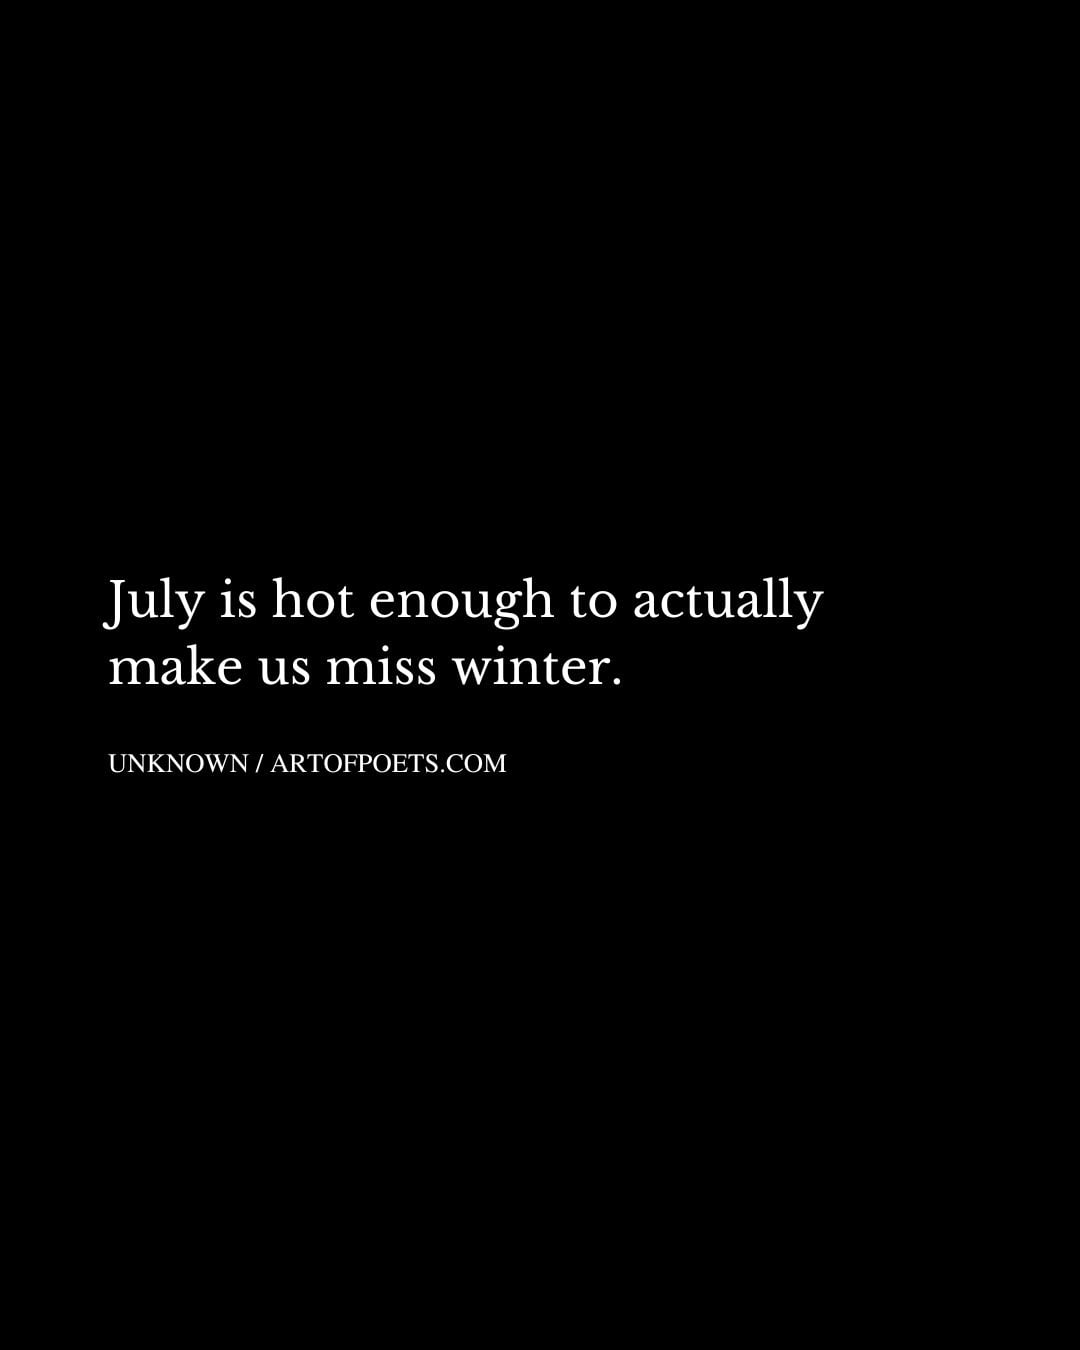 July is hot enough to actually make us miss winter